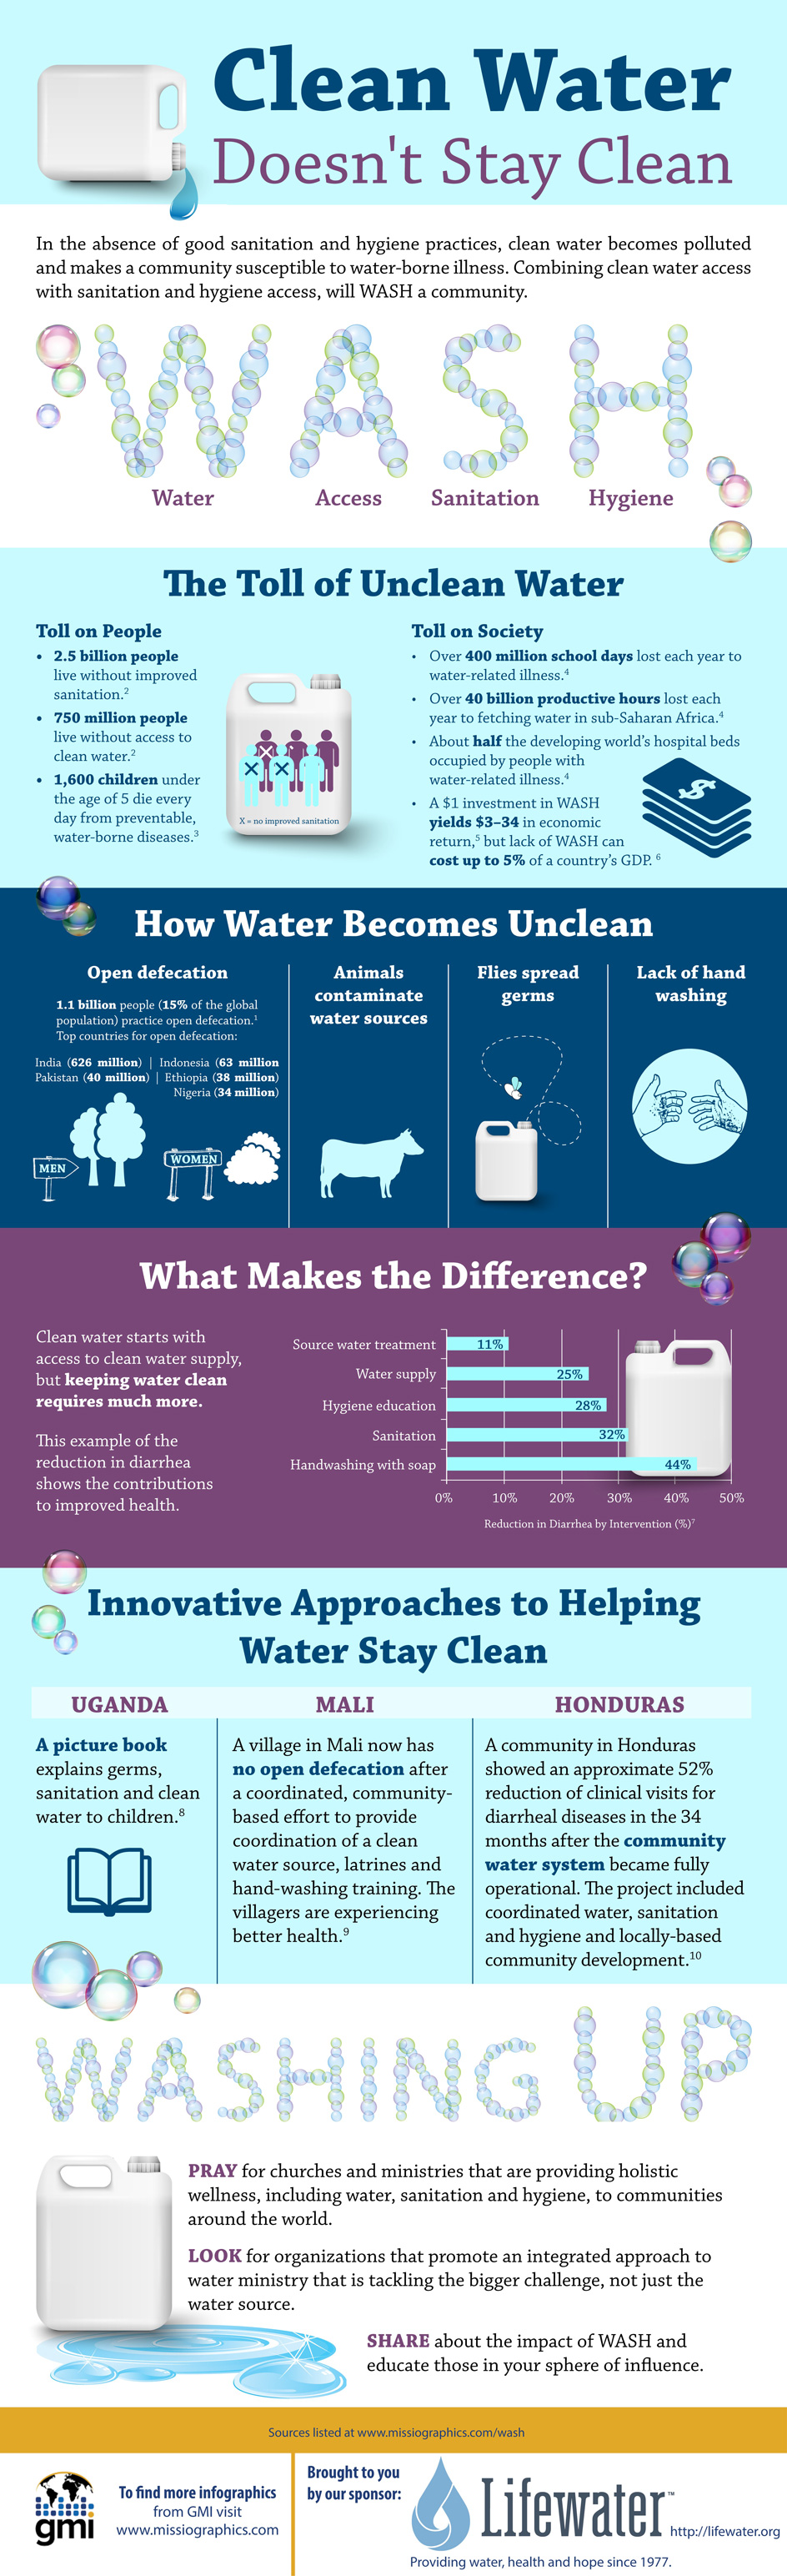 Lifewater World Water Day: Clean Water Doesn't Stay Clean